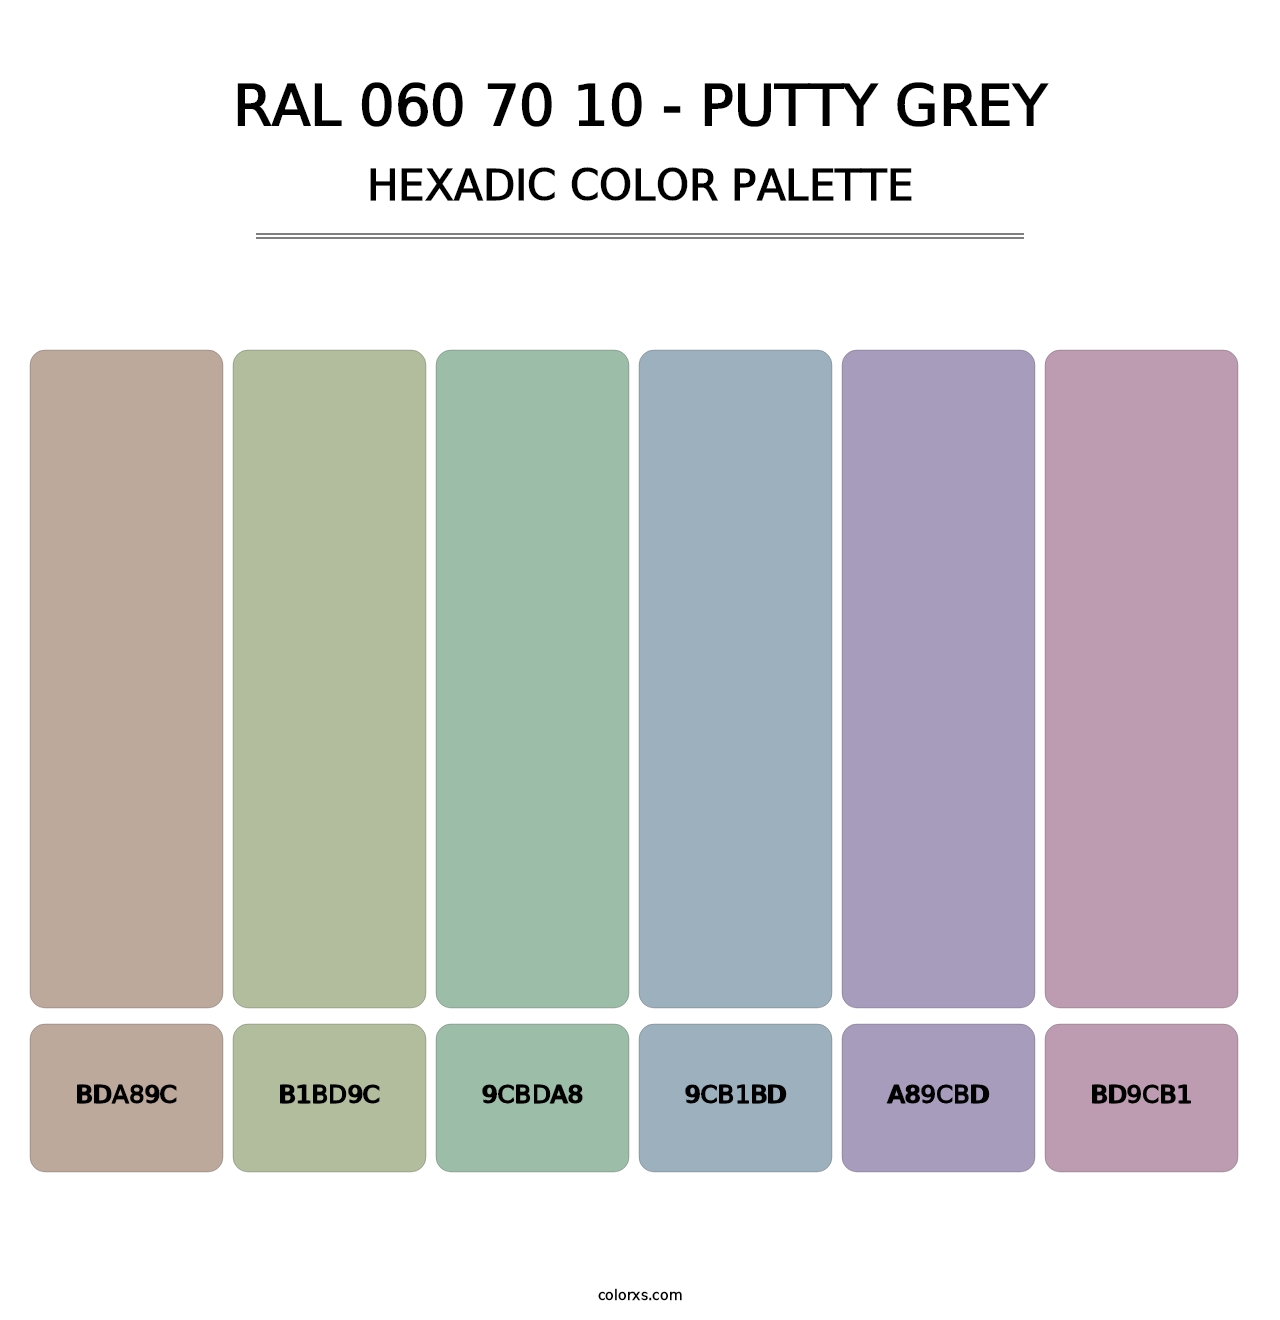 RAL 060 70 10 - Putty Grey - Hexadic Color Palette